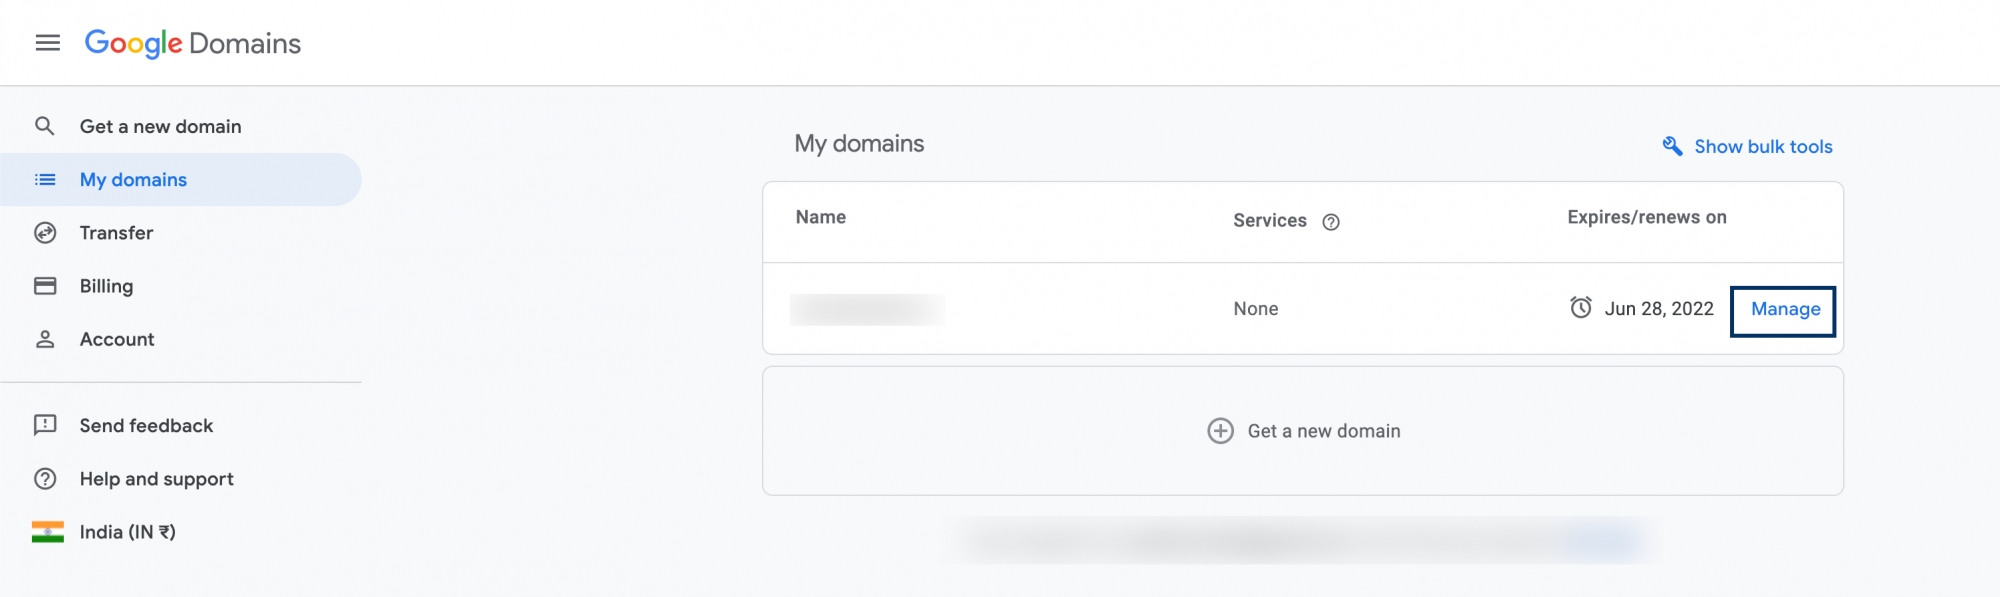 my domains